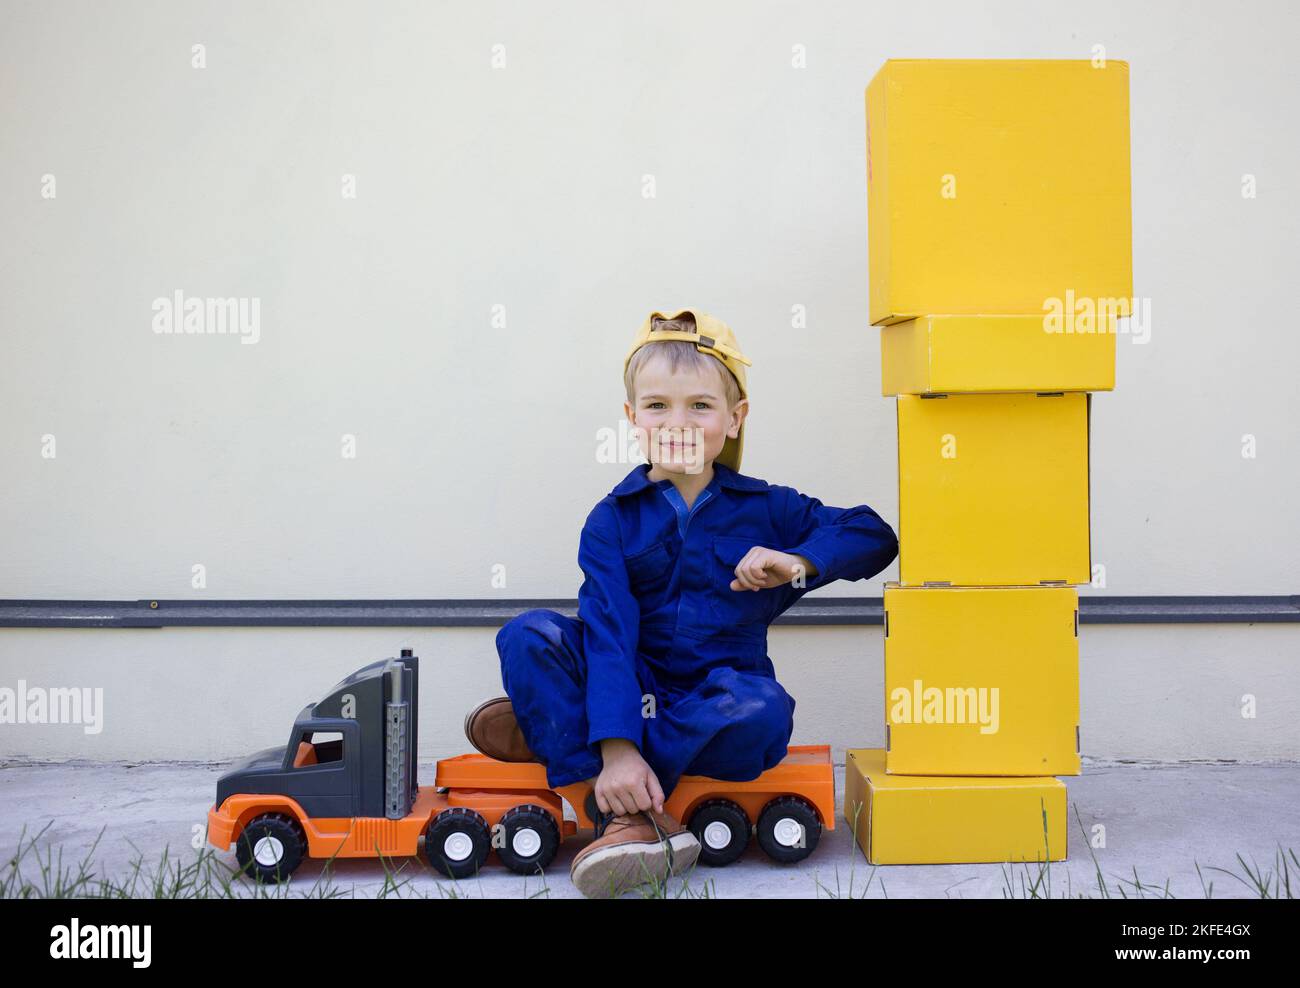 https://c8.alamy.com/comp/2KFE4GX/cute-smiling-6-year-old-boy-in-blue-uniform-is-sitting-on-big-toy-truck-next-to-a-lot-of-yellow-cardboard-boxes-parcel-delivery-truck-driver-positi-2KFE4GX.jpg